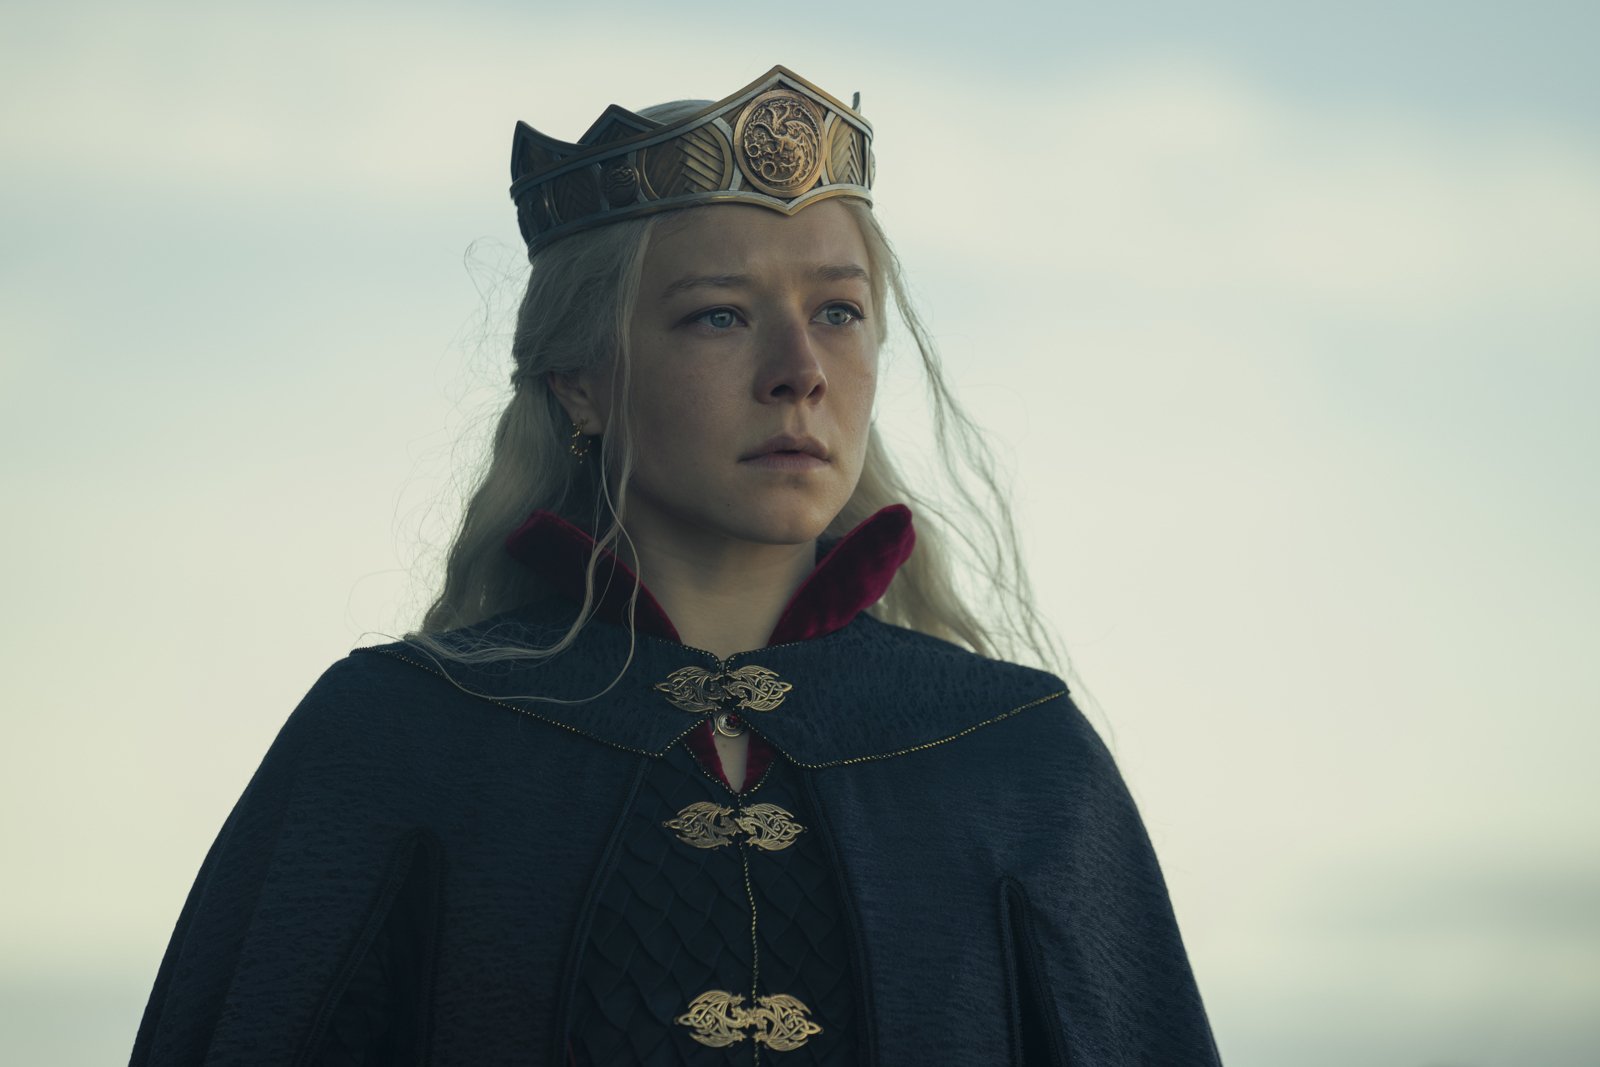 Emma D'Arcy as Rhaenyra Targaryen in 'House of the Dragon' for our article about the best book-to-TV adaptations of 2022. She's wearing a dark cloak and a crown.